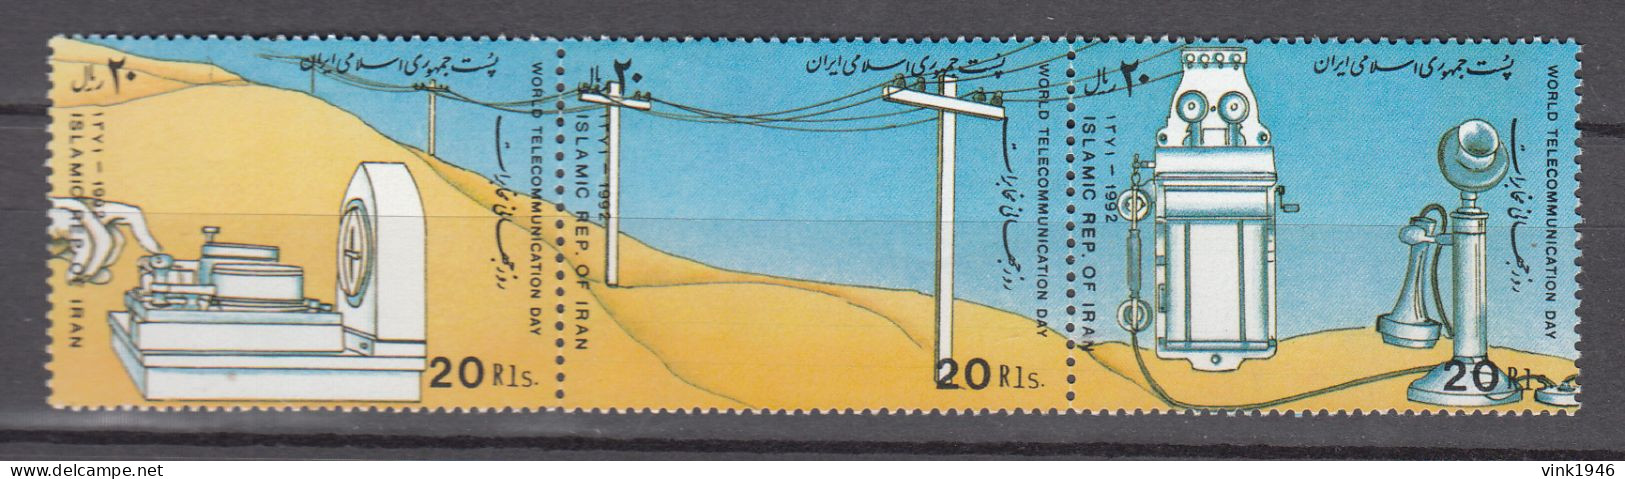 Iran 1992,3V In Strip(not Complete)Telecommunication,MNH/Postfris(L4465) - Other (Air)